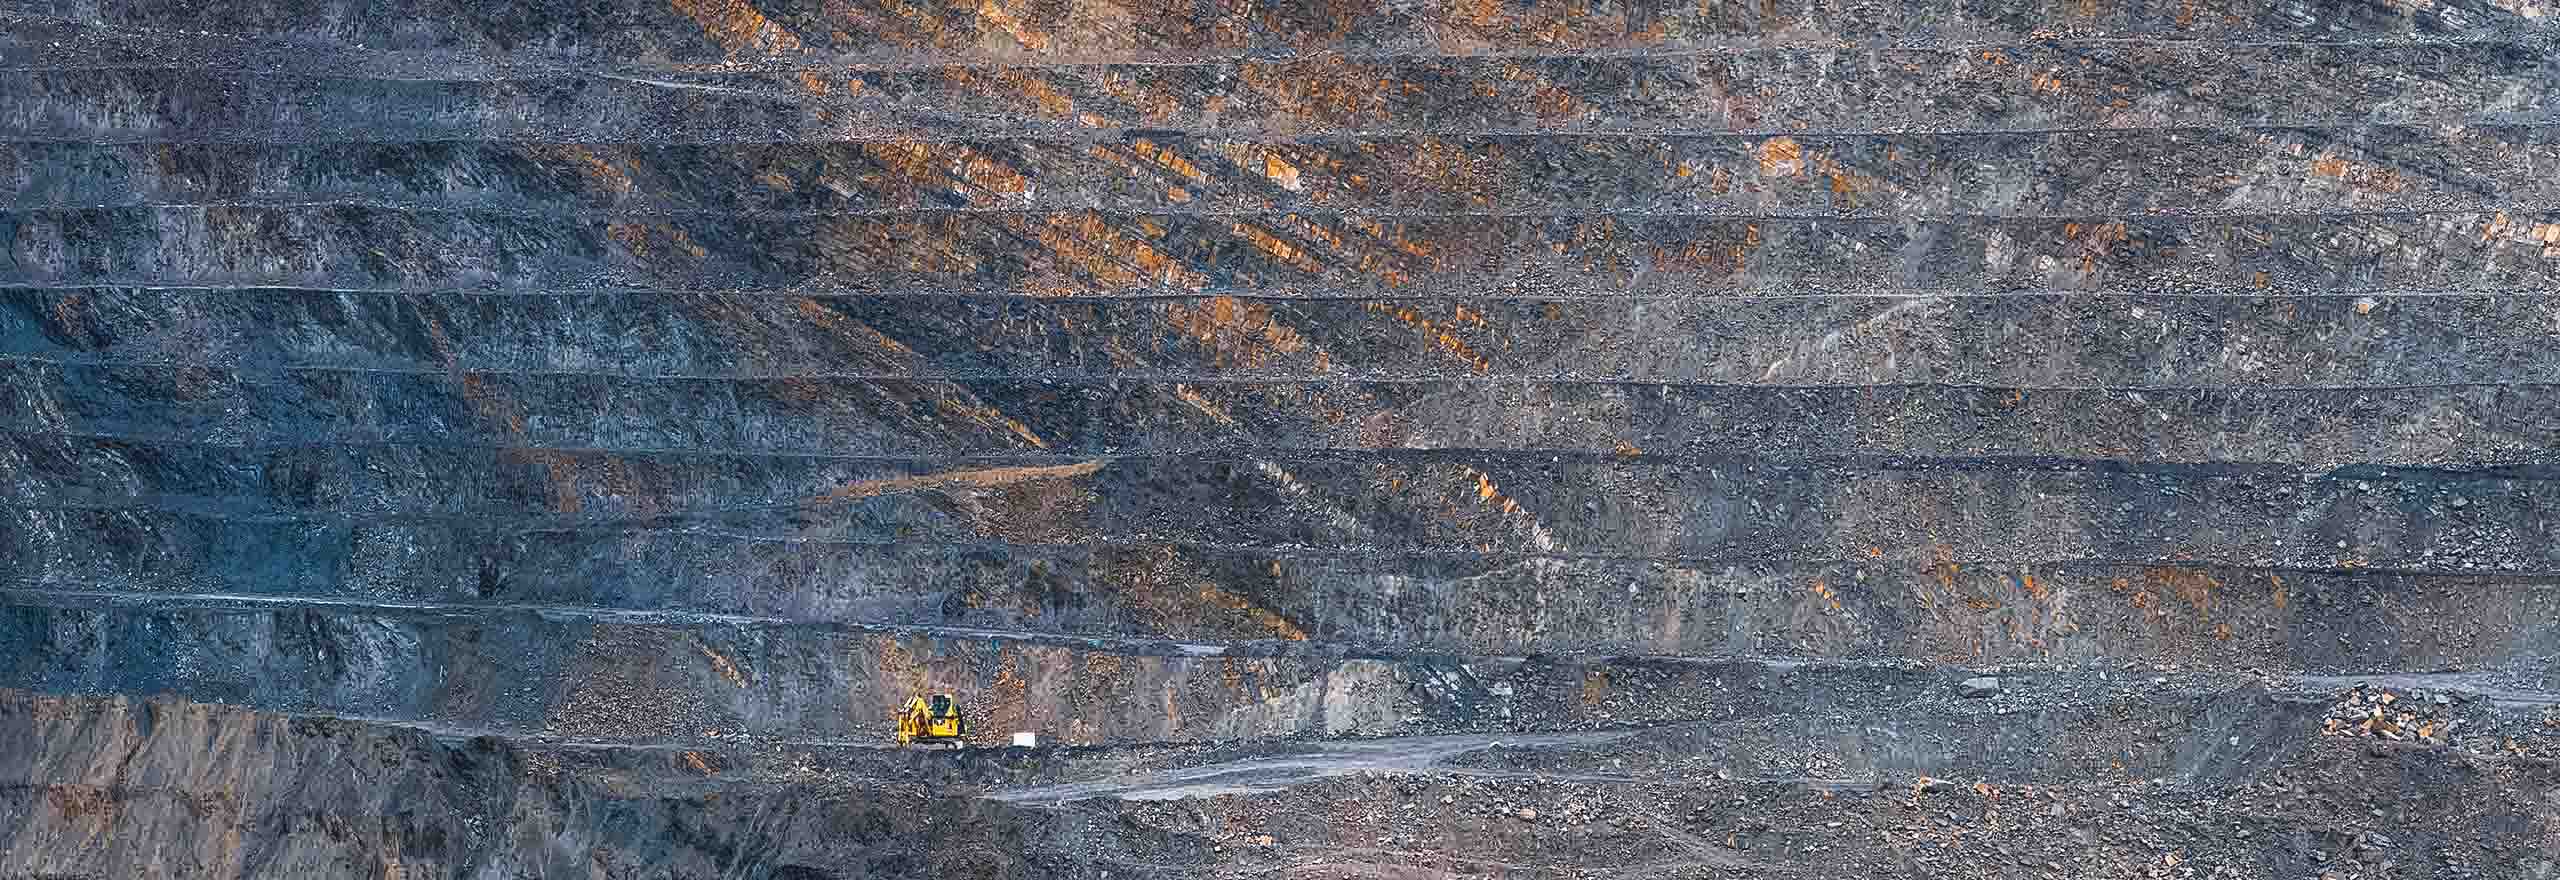 keeping a watchful eye on slope stability in open pit